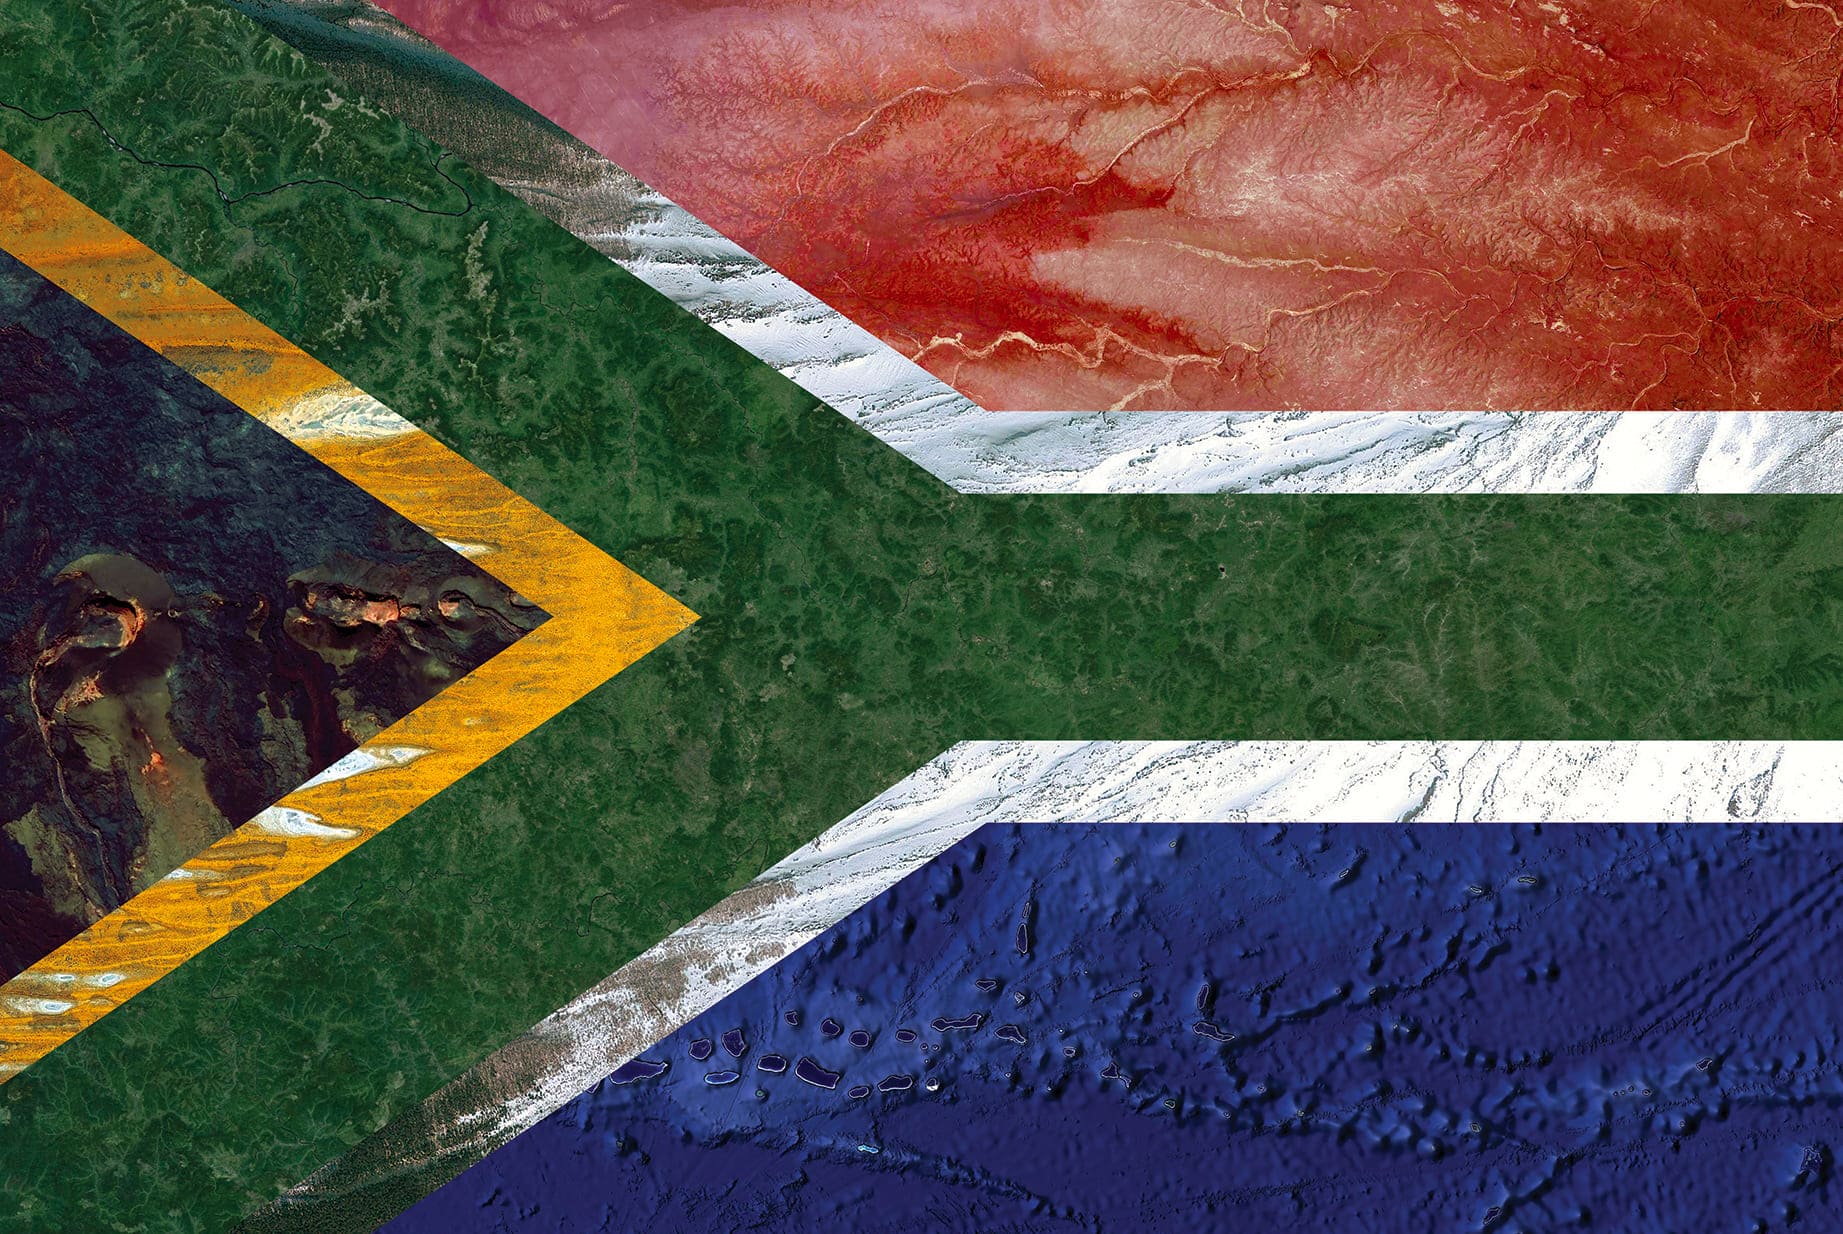 SOUTH AFRICA EARTH FLAG, 2016, DIGITAL COLLAGE OF SATELLITE PHOTOGRAPHY FROM HAWAII, AUSTRALIA, RUSSIA, JAPAN, IRAQ, OCEANIA, diasec print CM 67×100, edition of 9